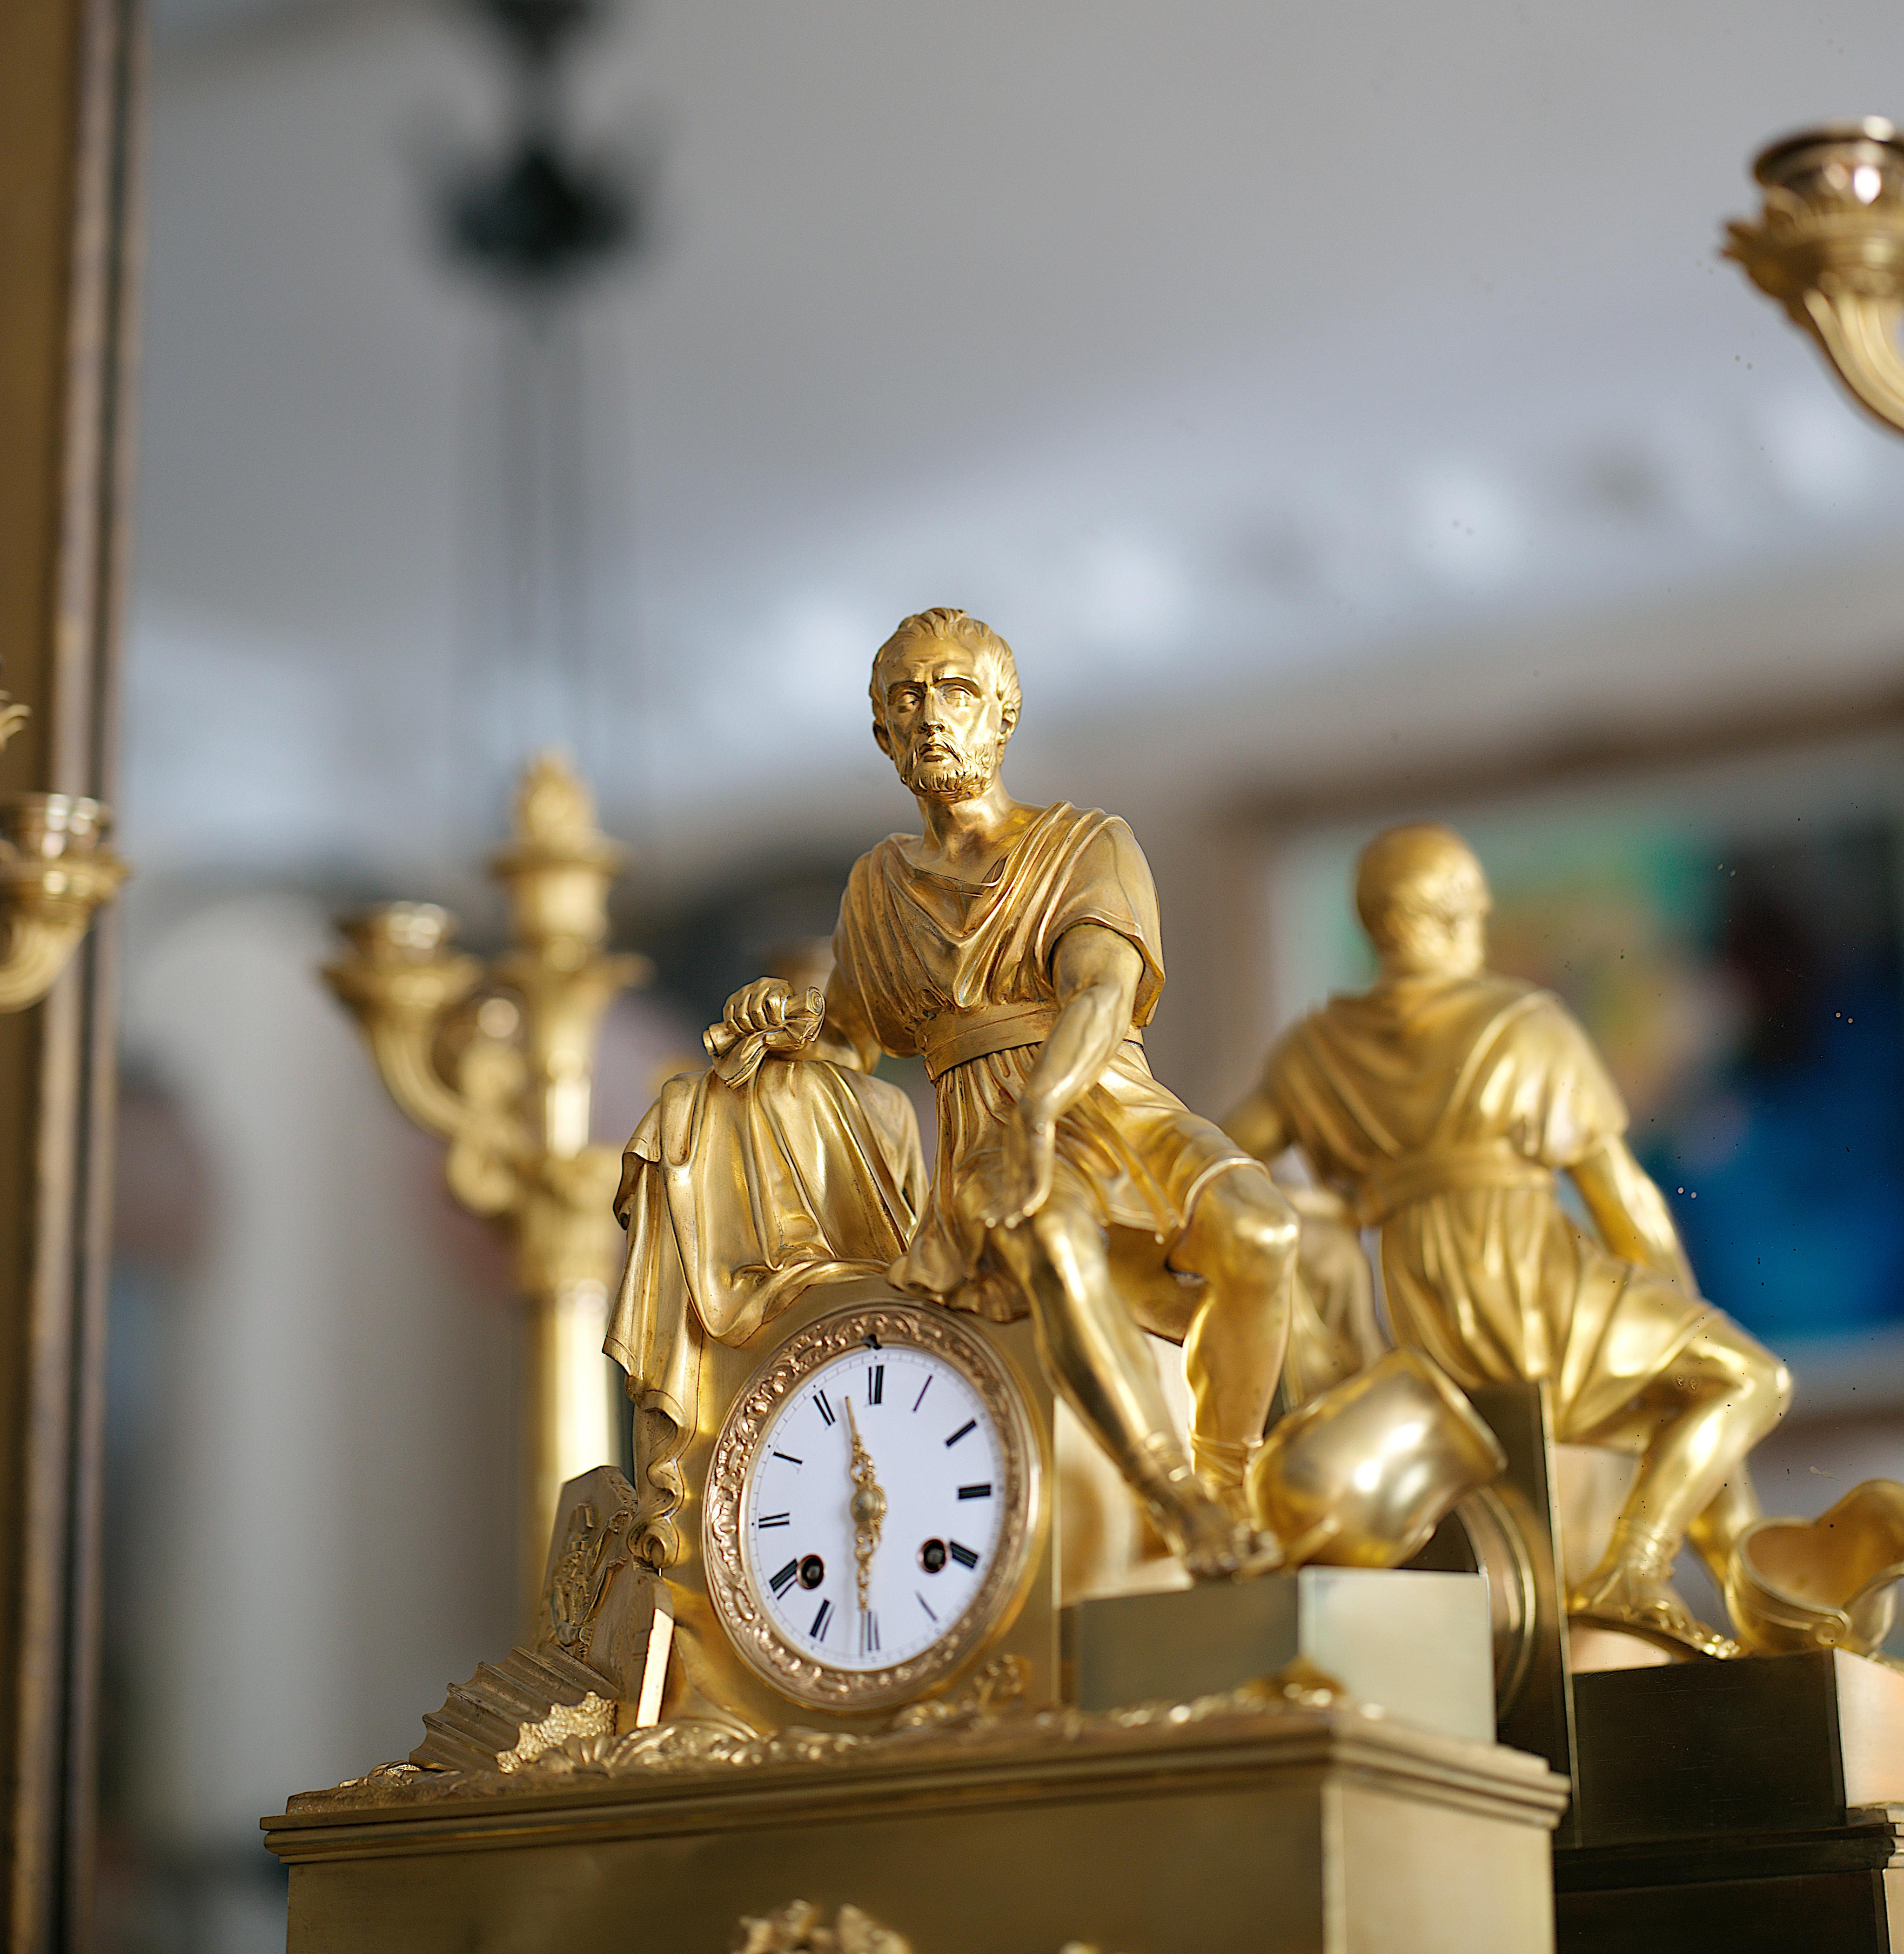 Mid-19th Century French Restoration Mantel Clock set, 1820-1830s For Sale